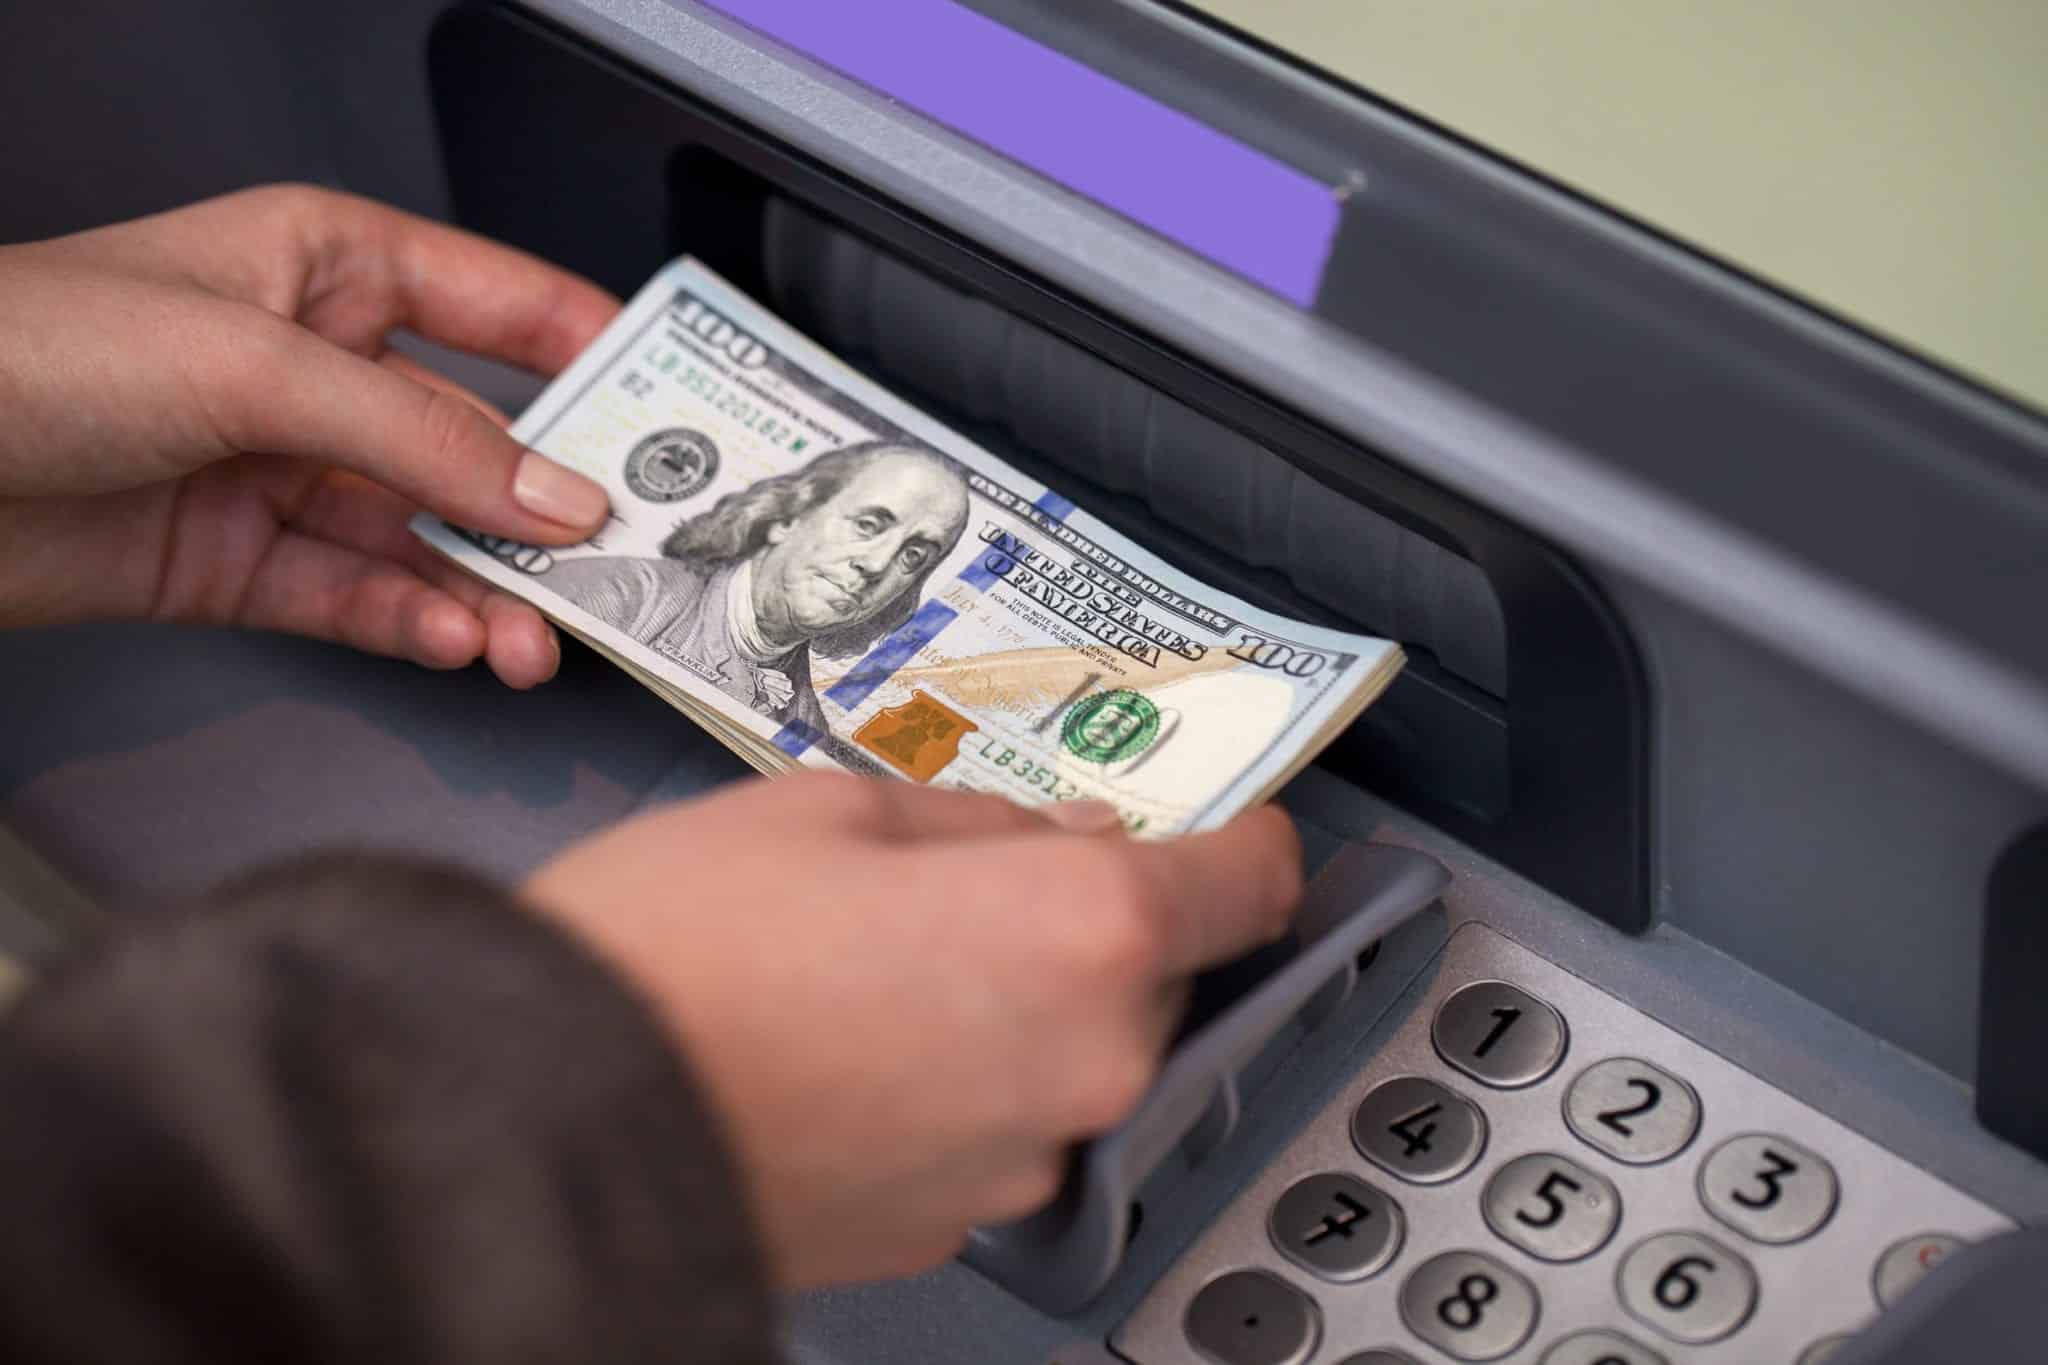 WhiteRabbit Floyd 550 1 What Kind of Charges Would Follow a Massive ATM Hack